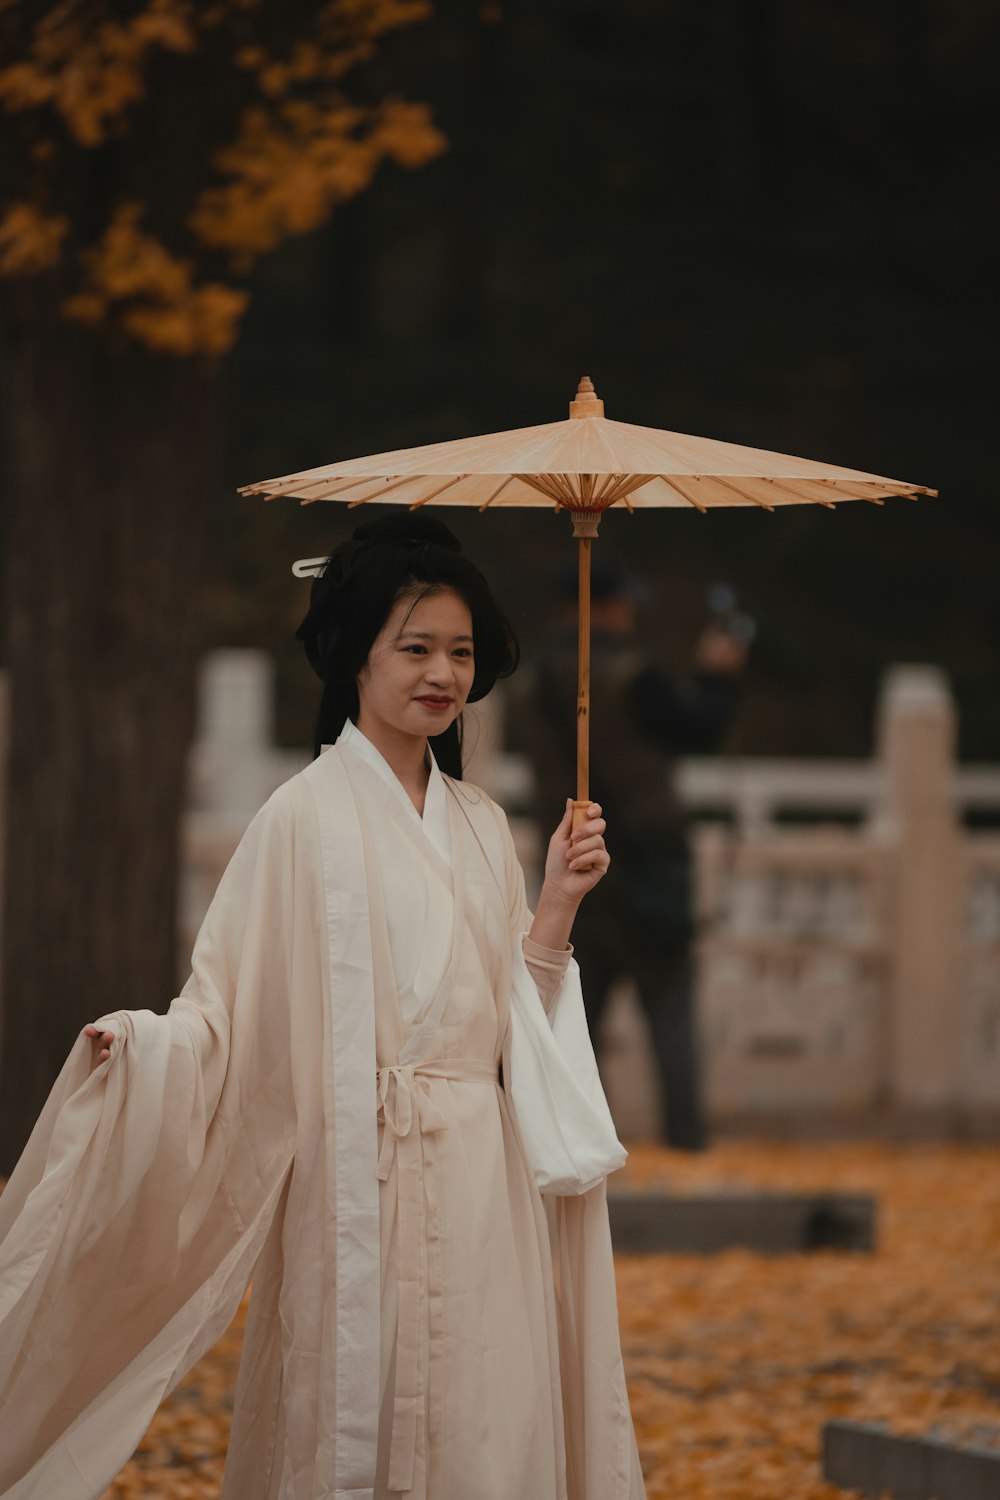 a person in a white dress holding an umbrella